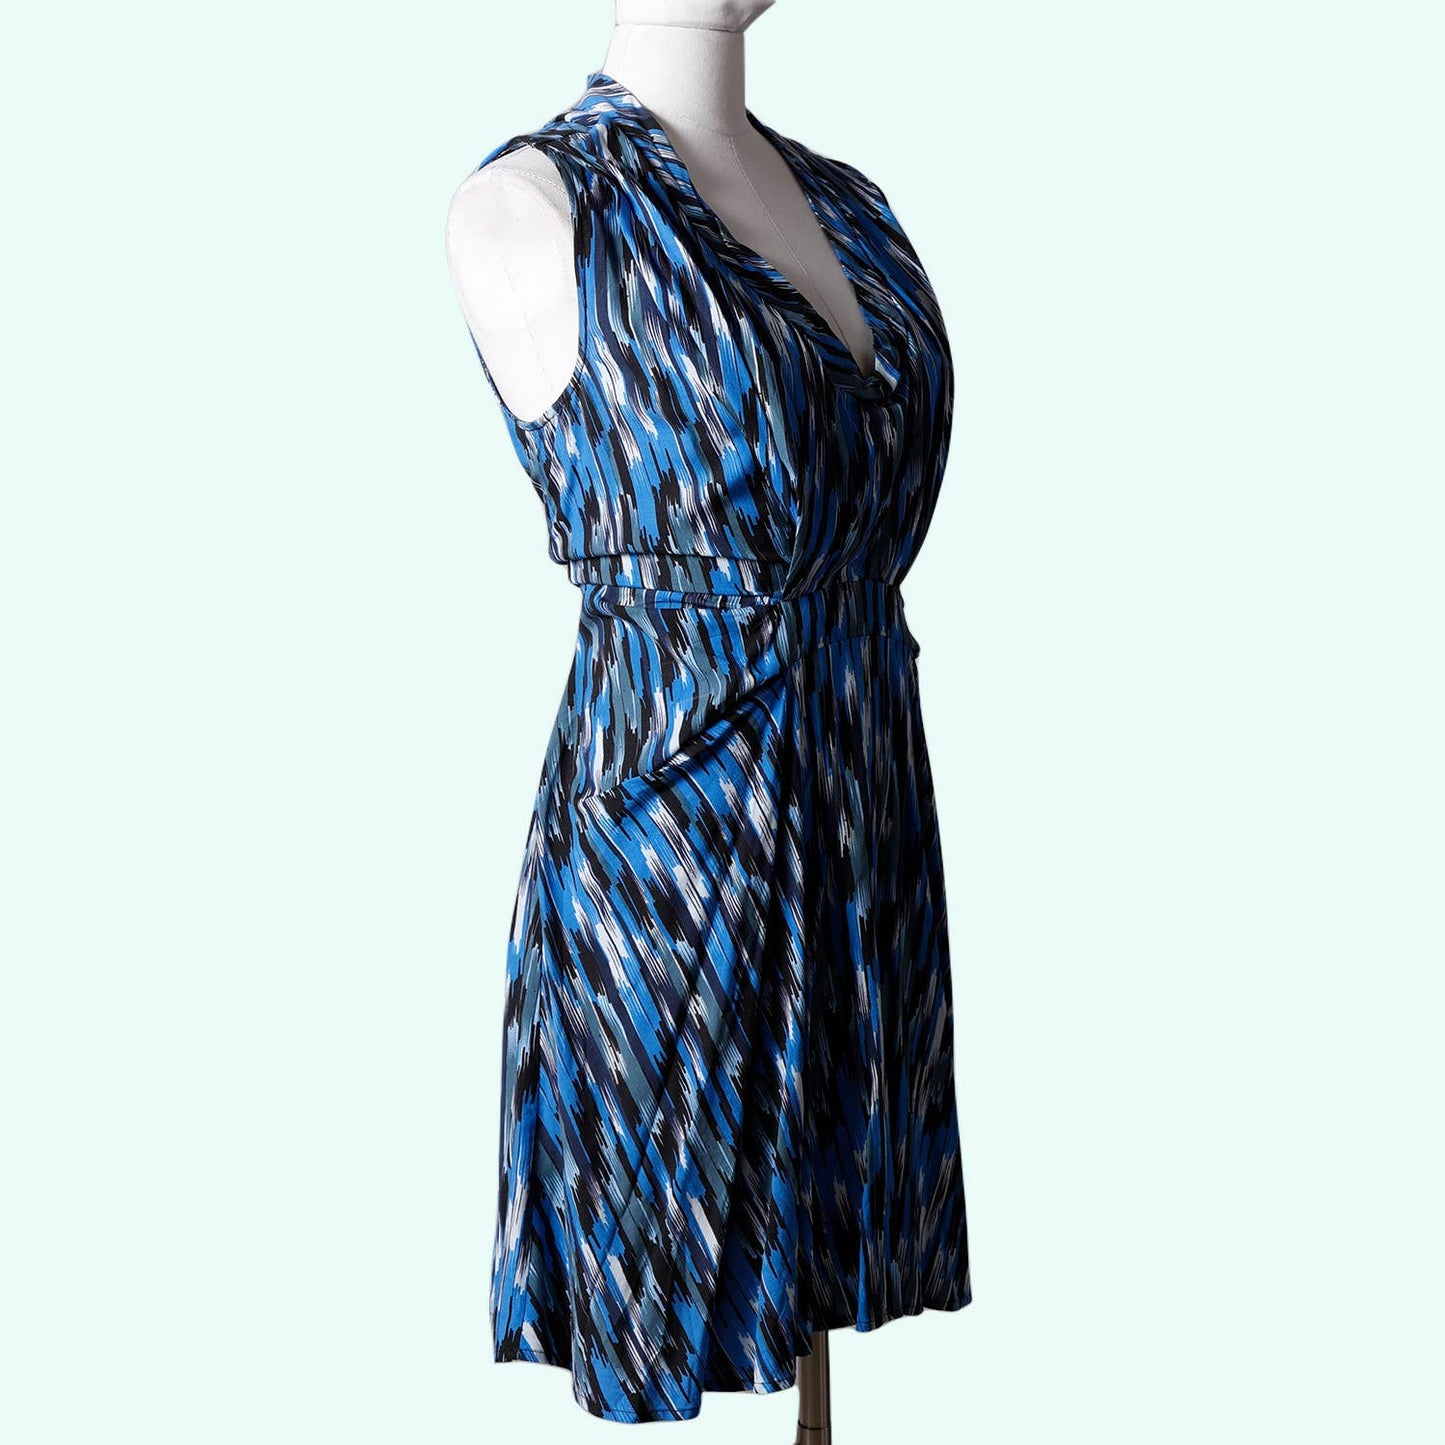 THAKOON Blue, Black and White Abstract Printed Sleeveless Dress